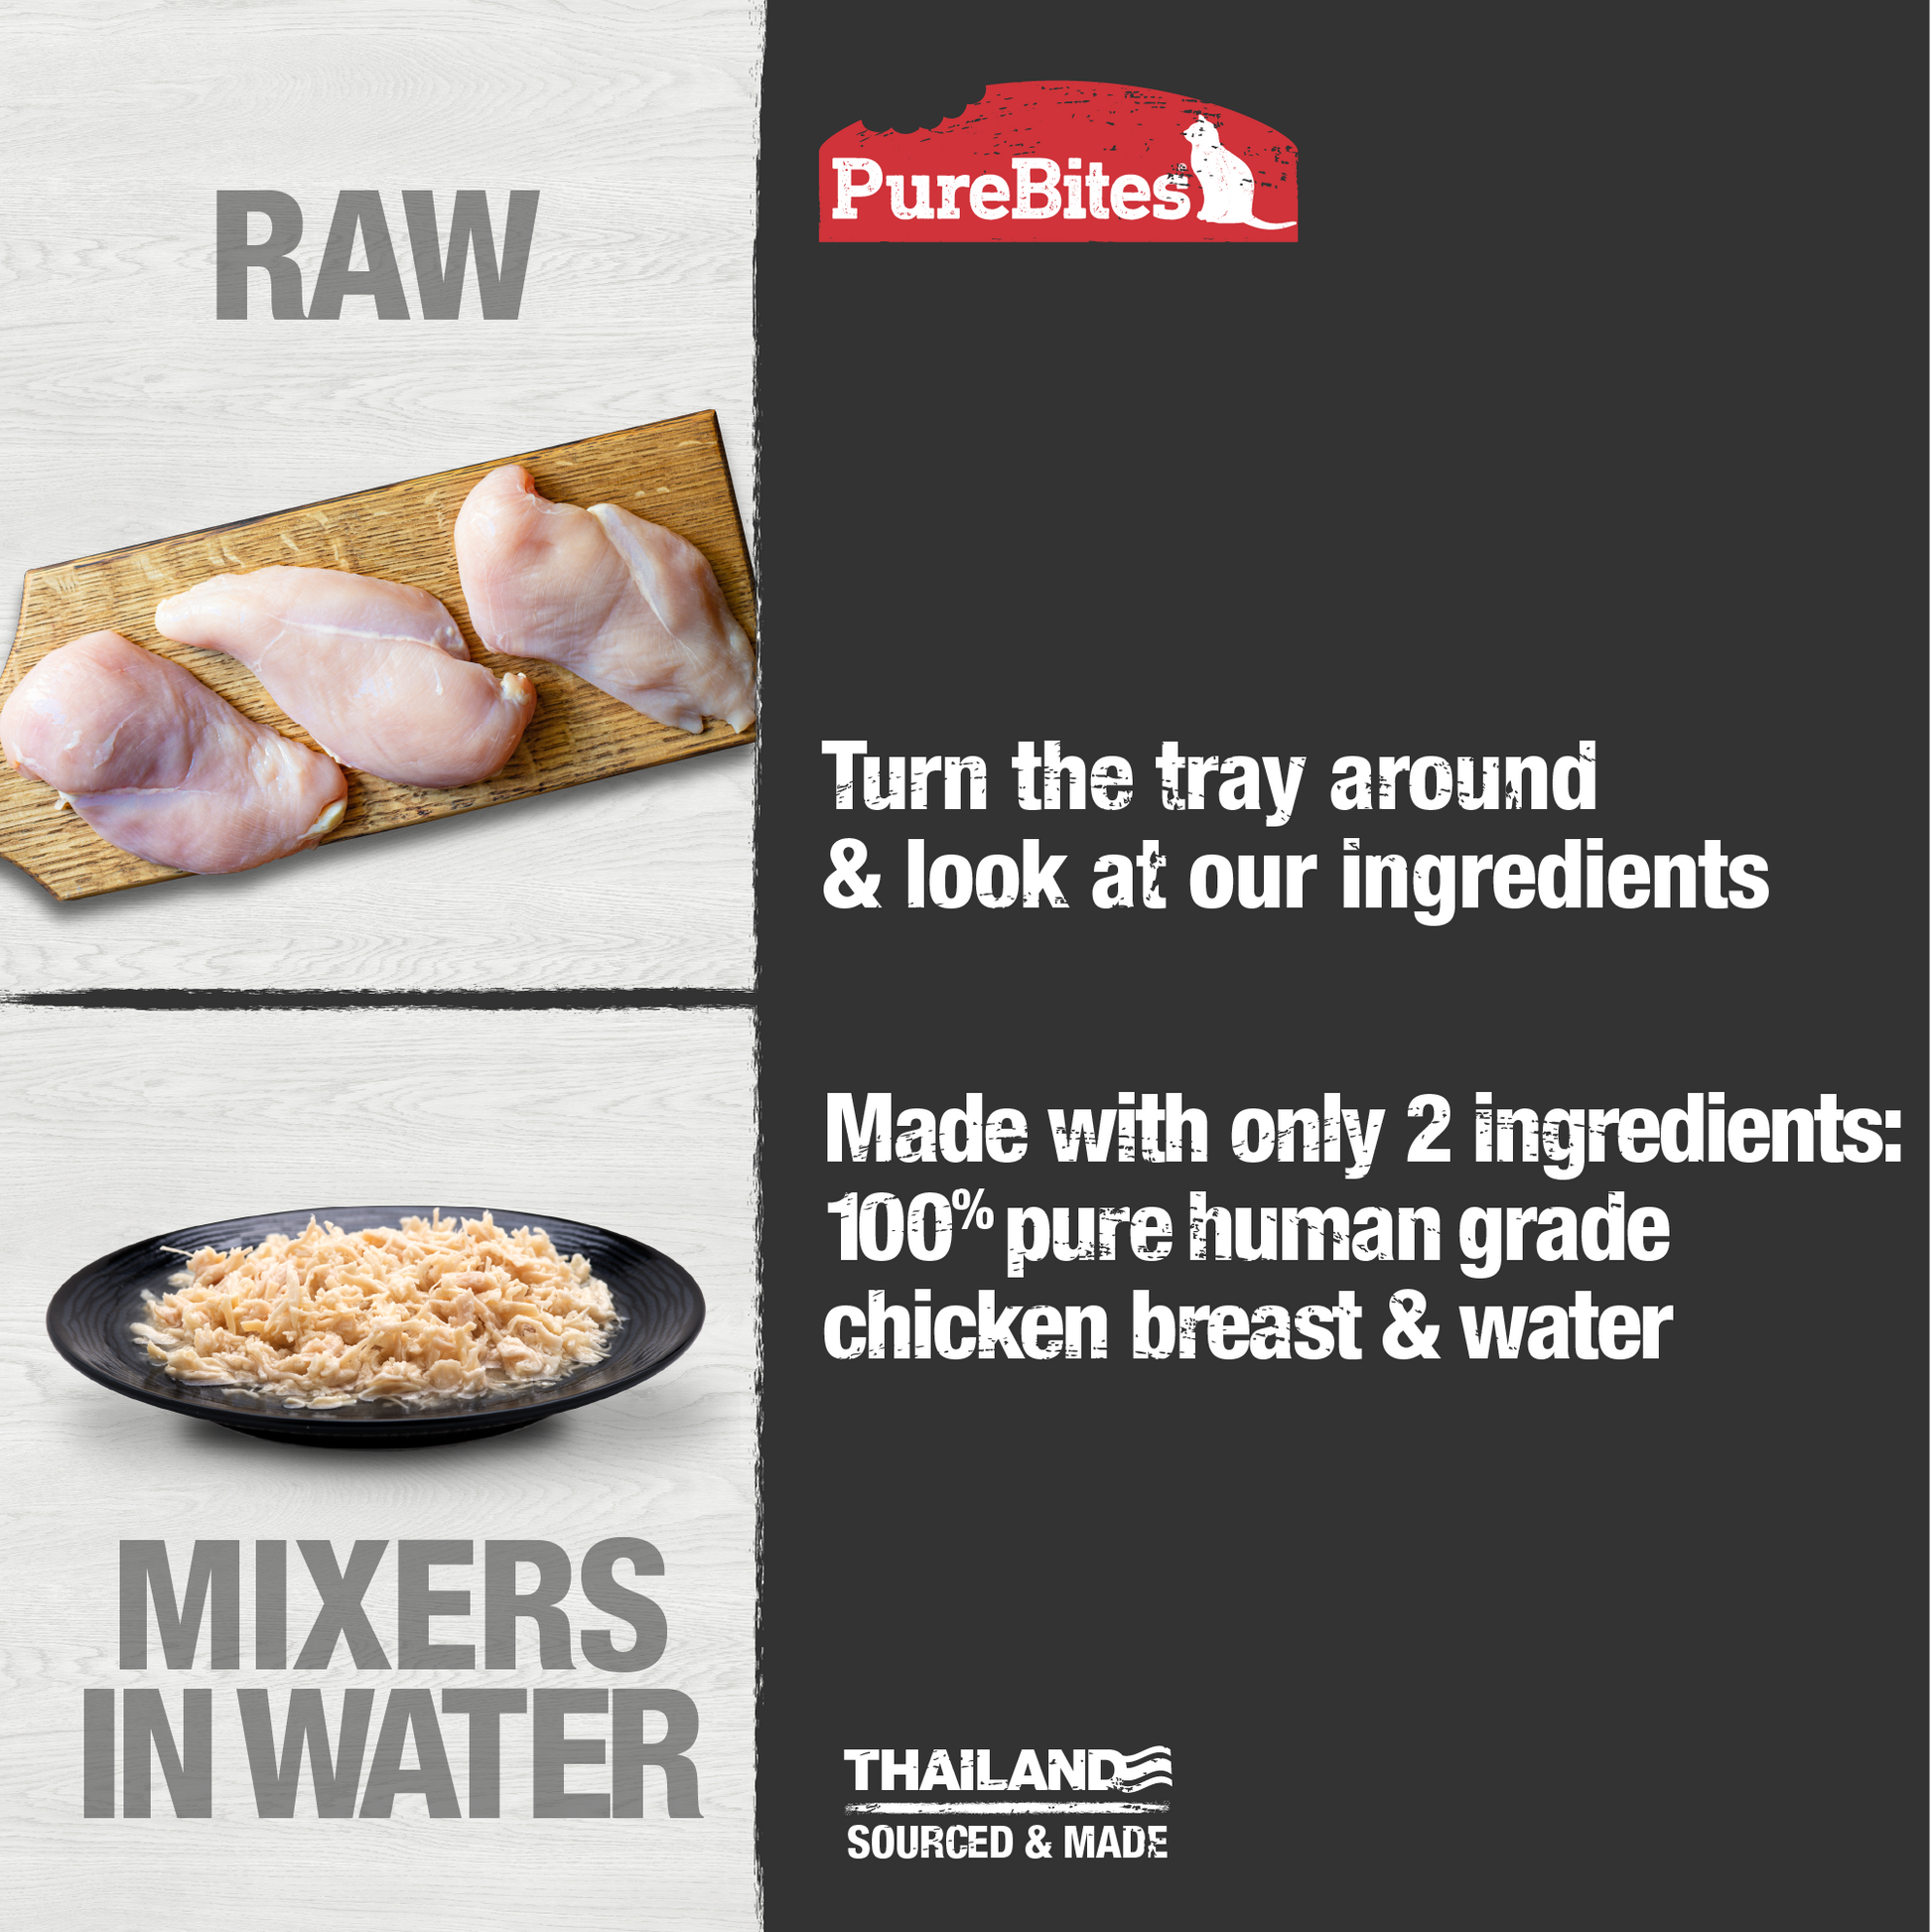 Made with only 2 Ingredients you can read, pronounce, and trust: Chicken breast, water.